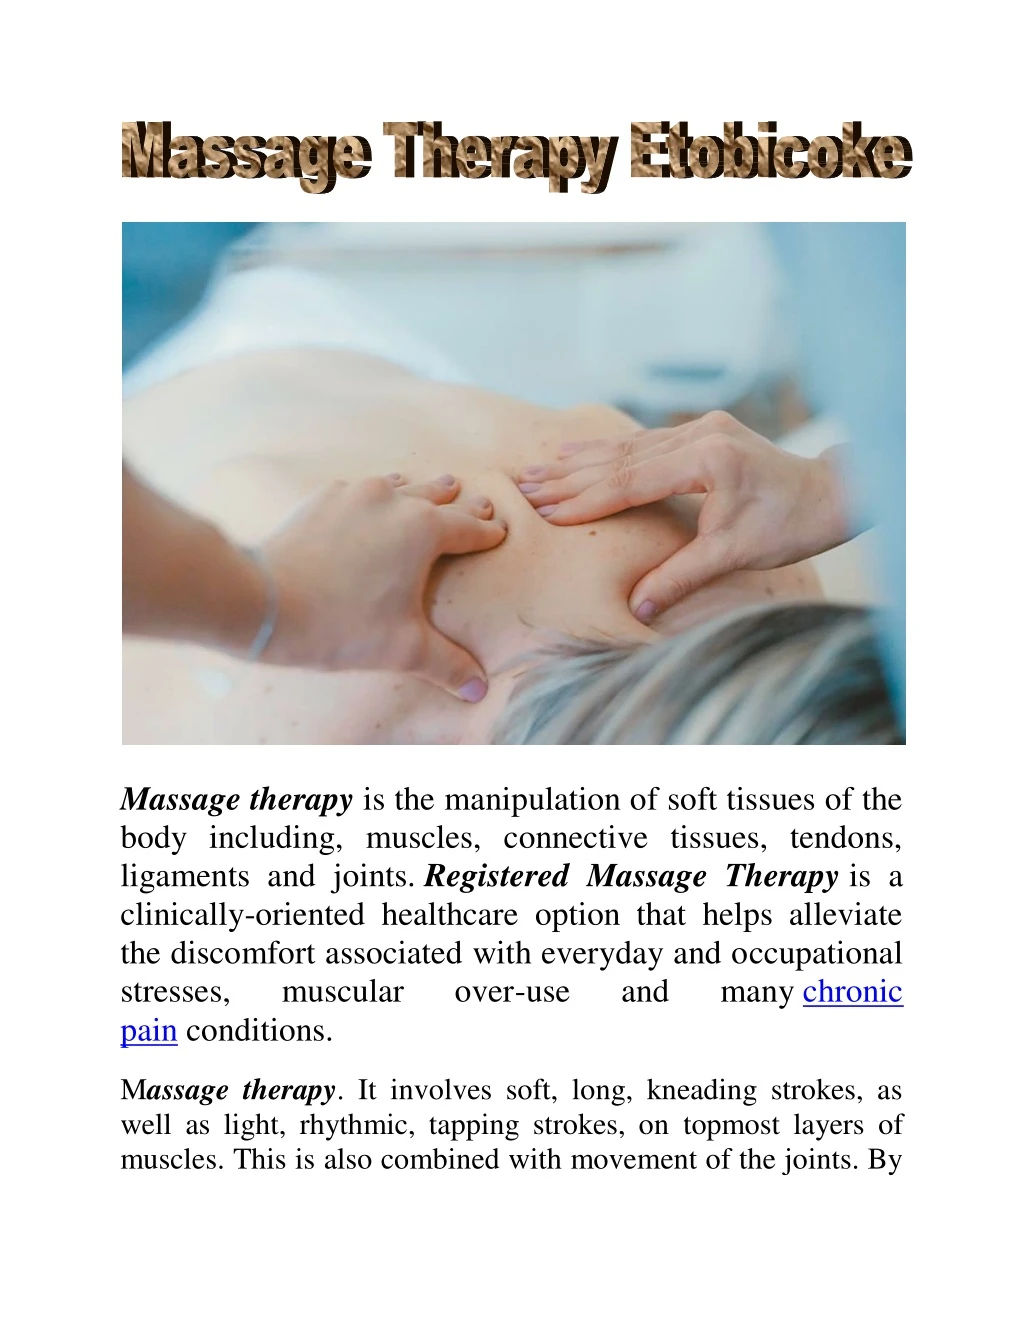 massage therapy is the manipulation of soft